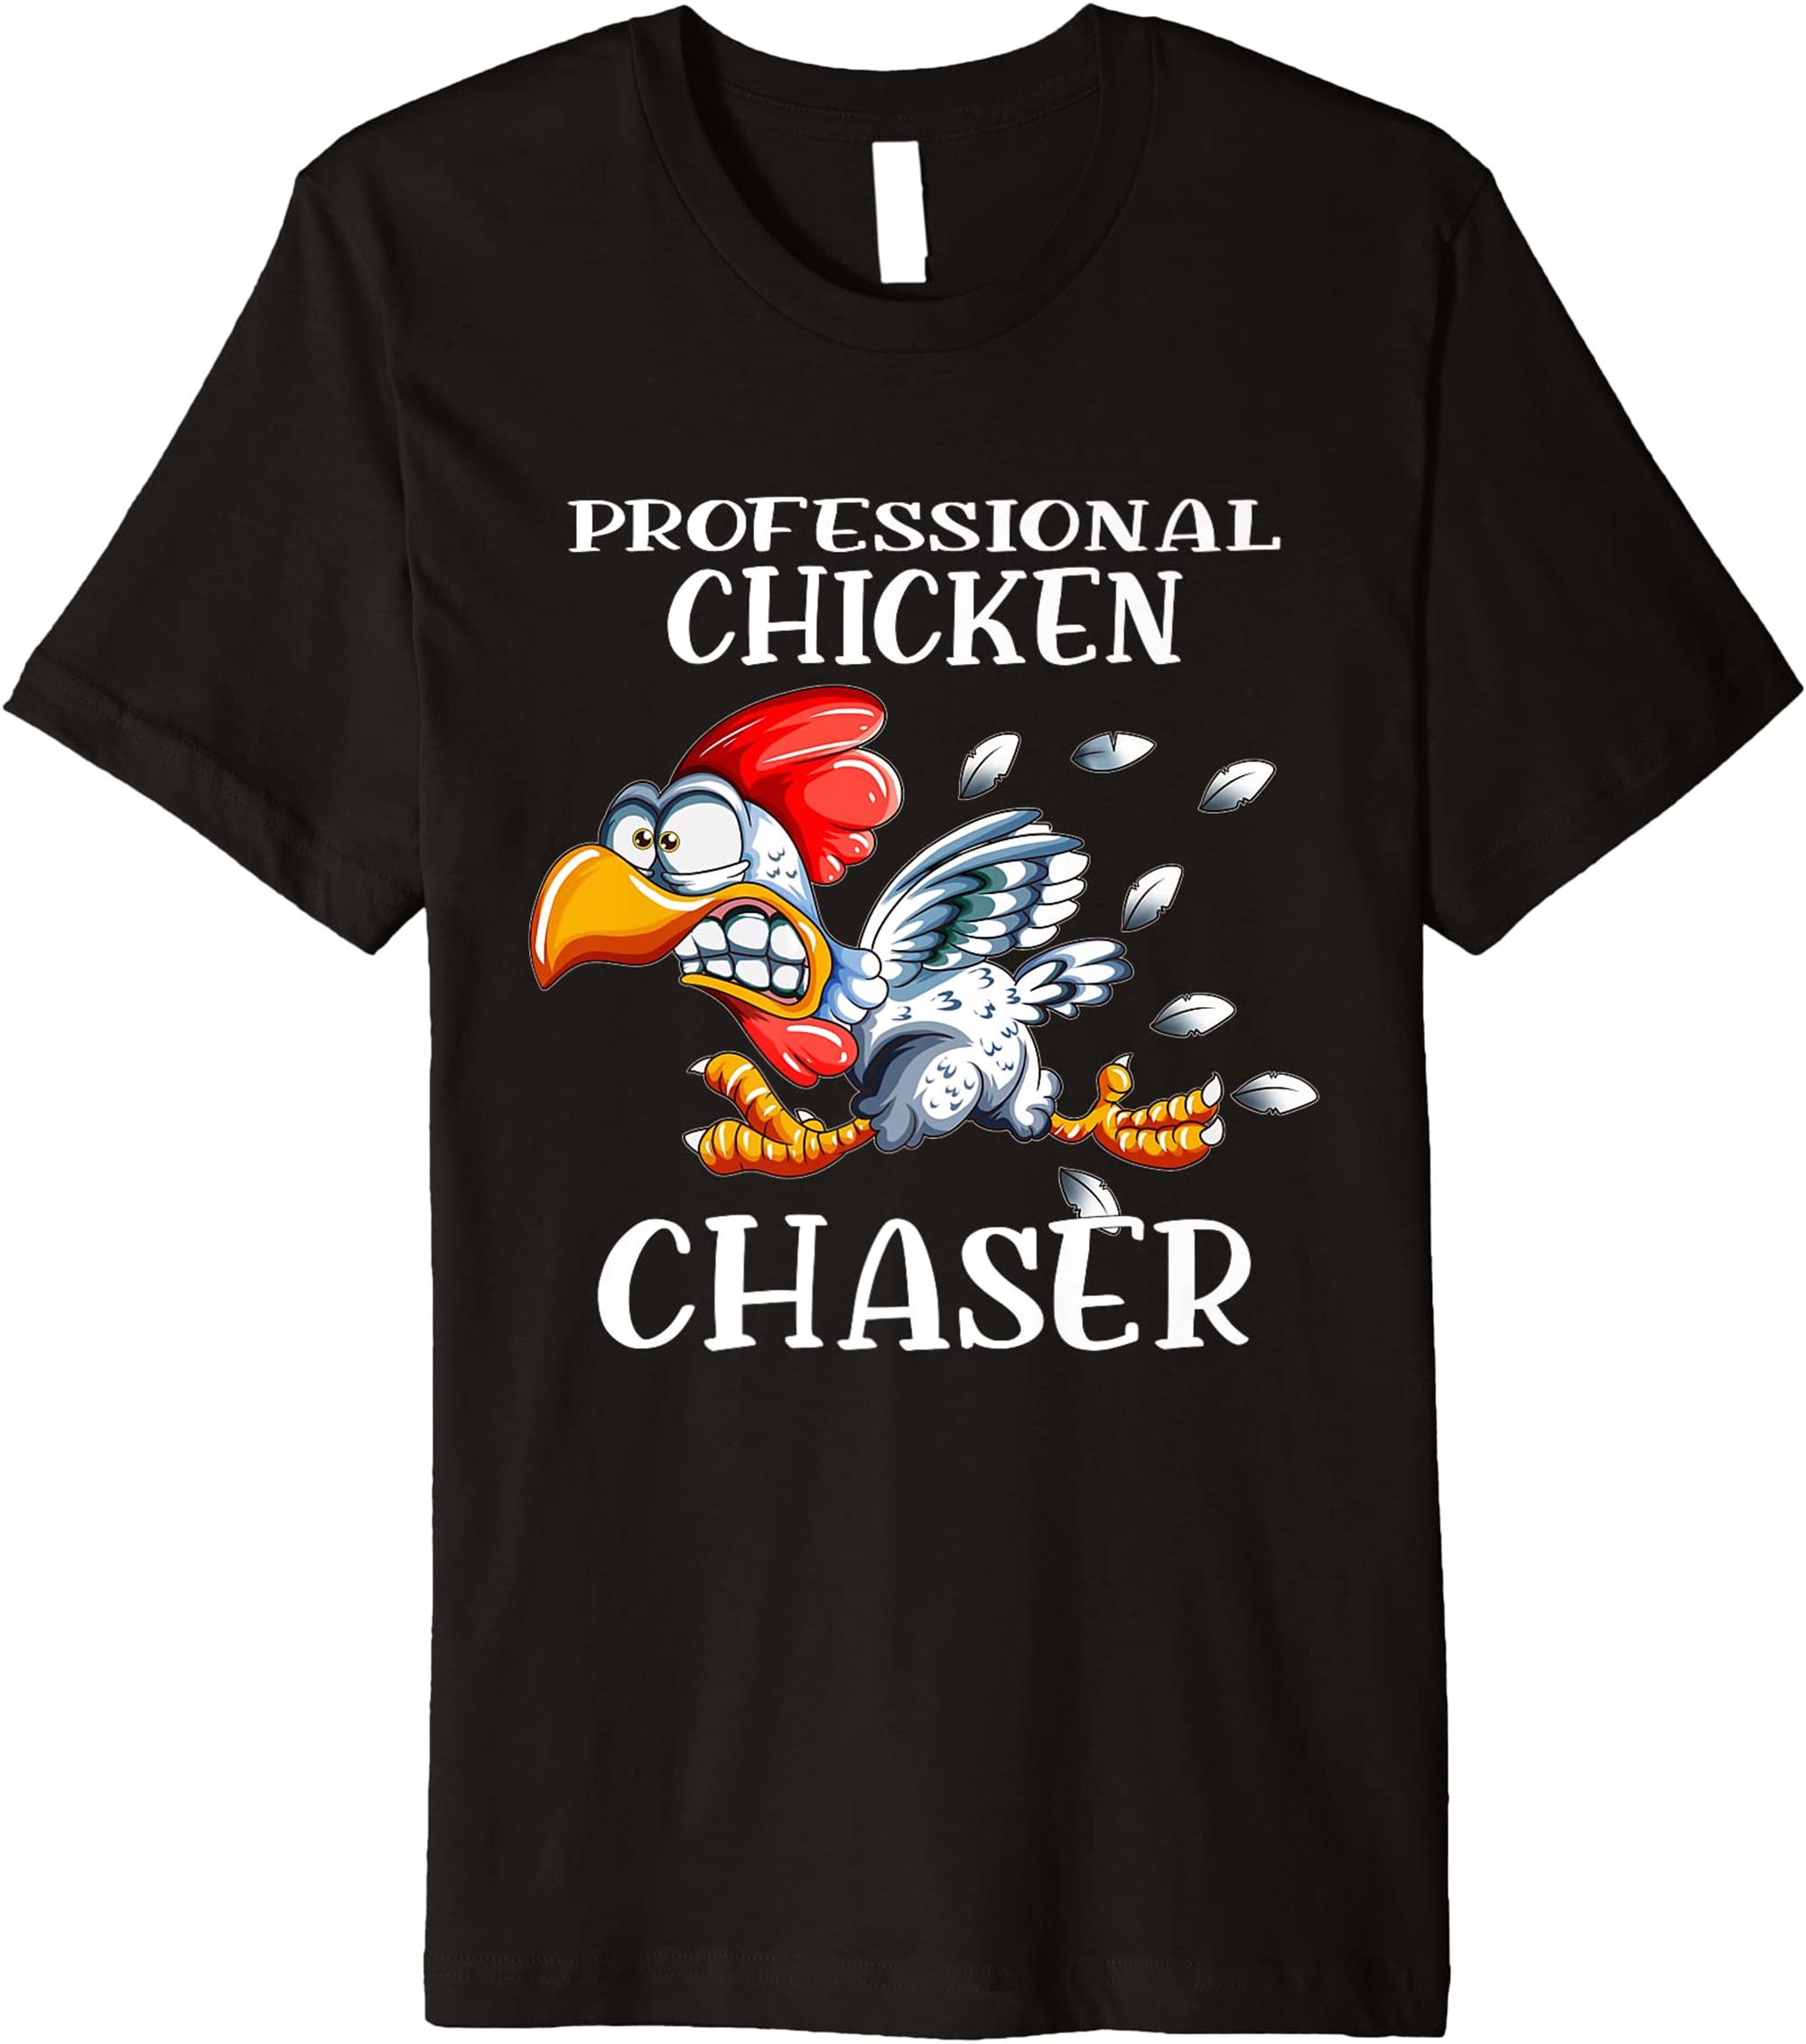 Chicken Professional Chicken Chaser Chickens Farm Farmers Premium T-shirt Plus Size Up To 5xl